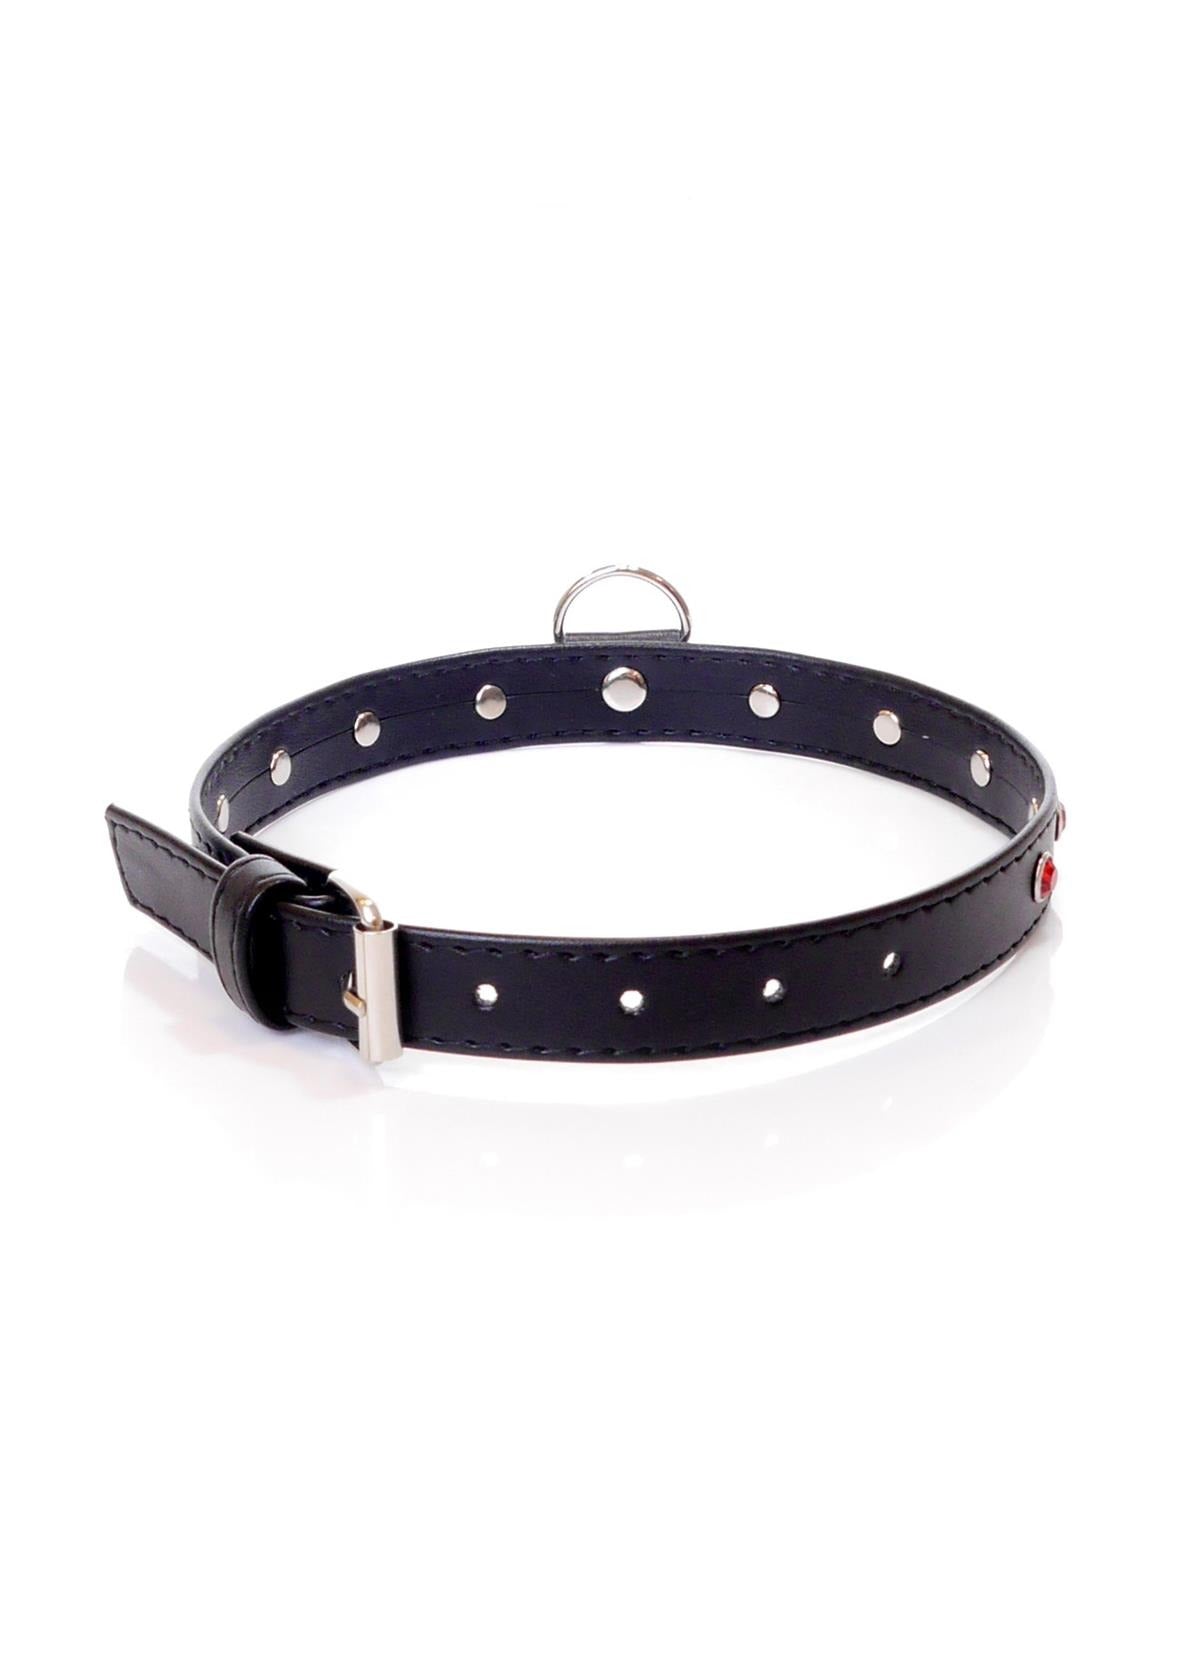 Bossoftoys - 33-00121 - Fetish Collar Red with stones - 2 cm width - Red line adjustable - easy to hang - with product tag /barcode